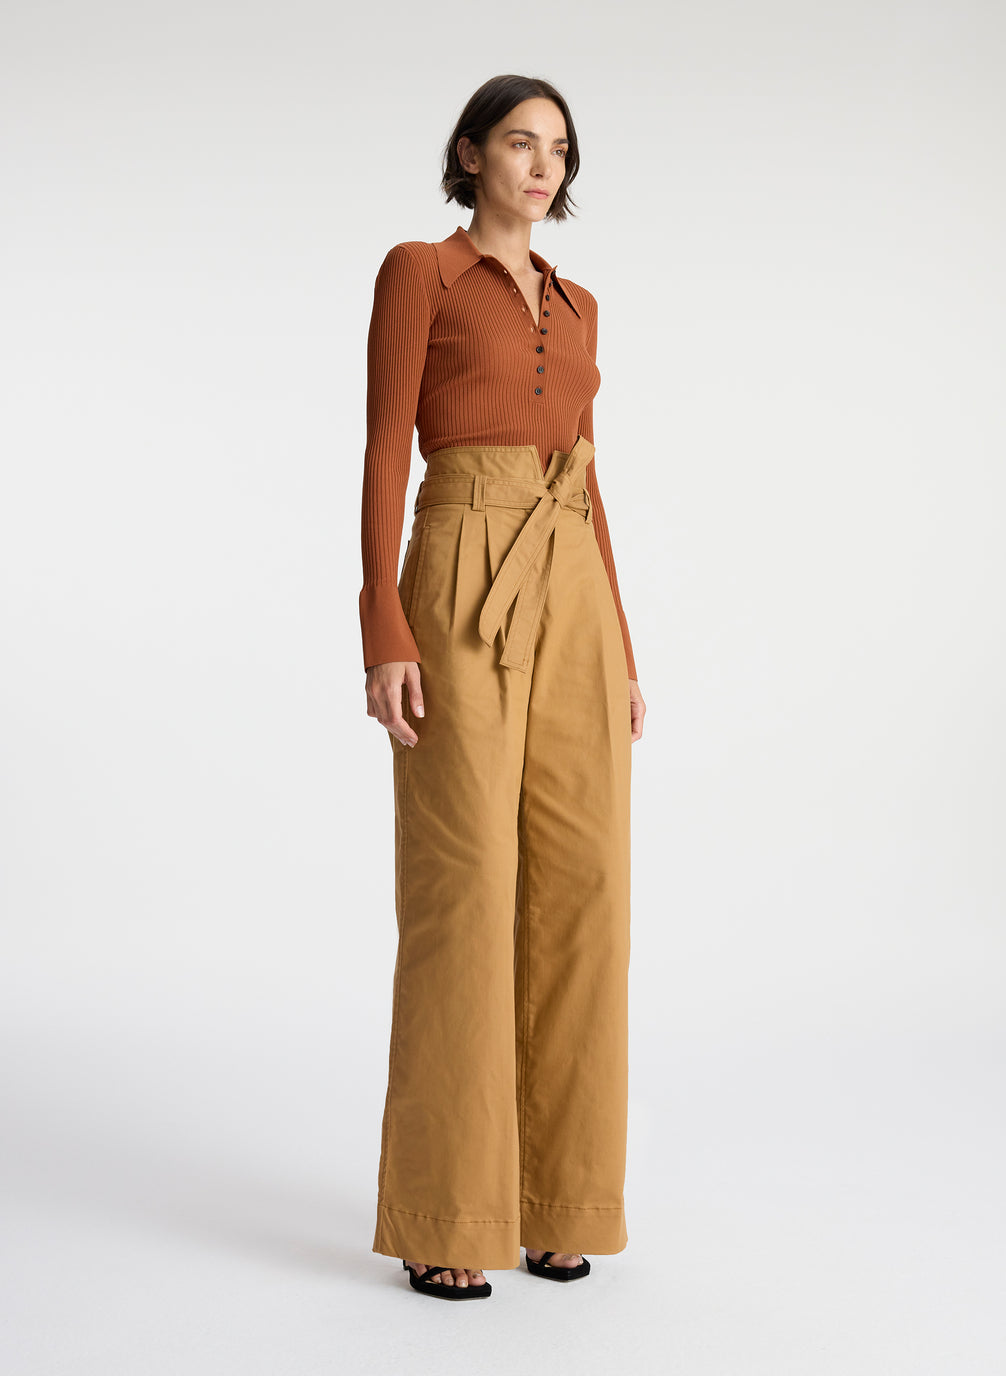 side view of woman wearing brown button up sweater with tan wide leg pants